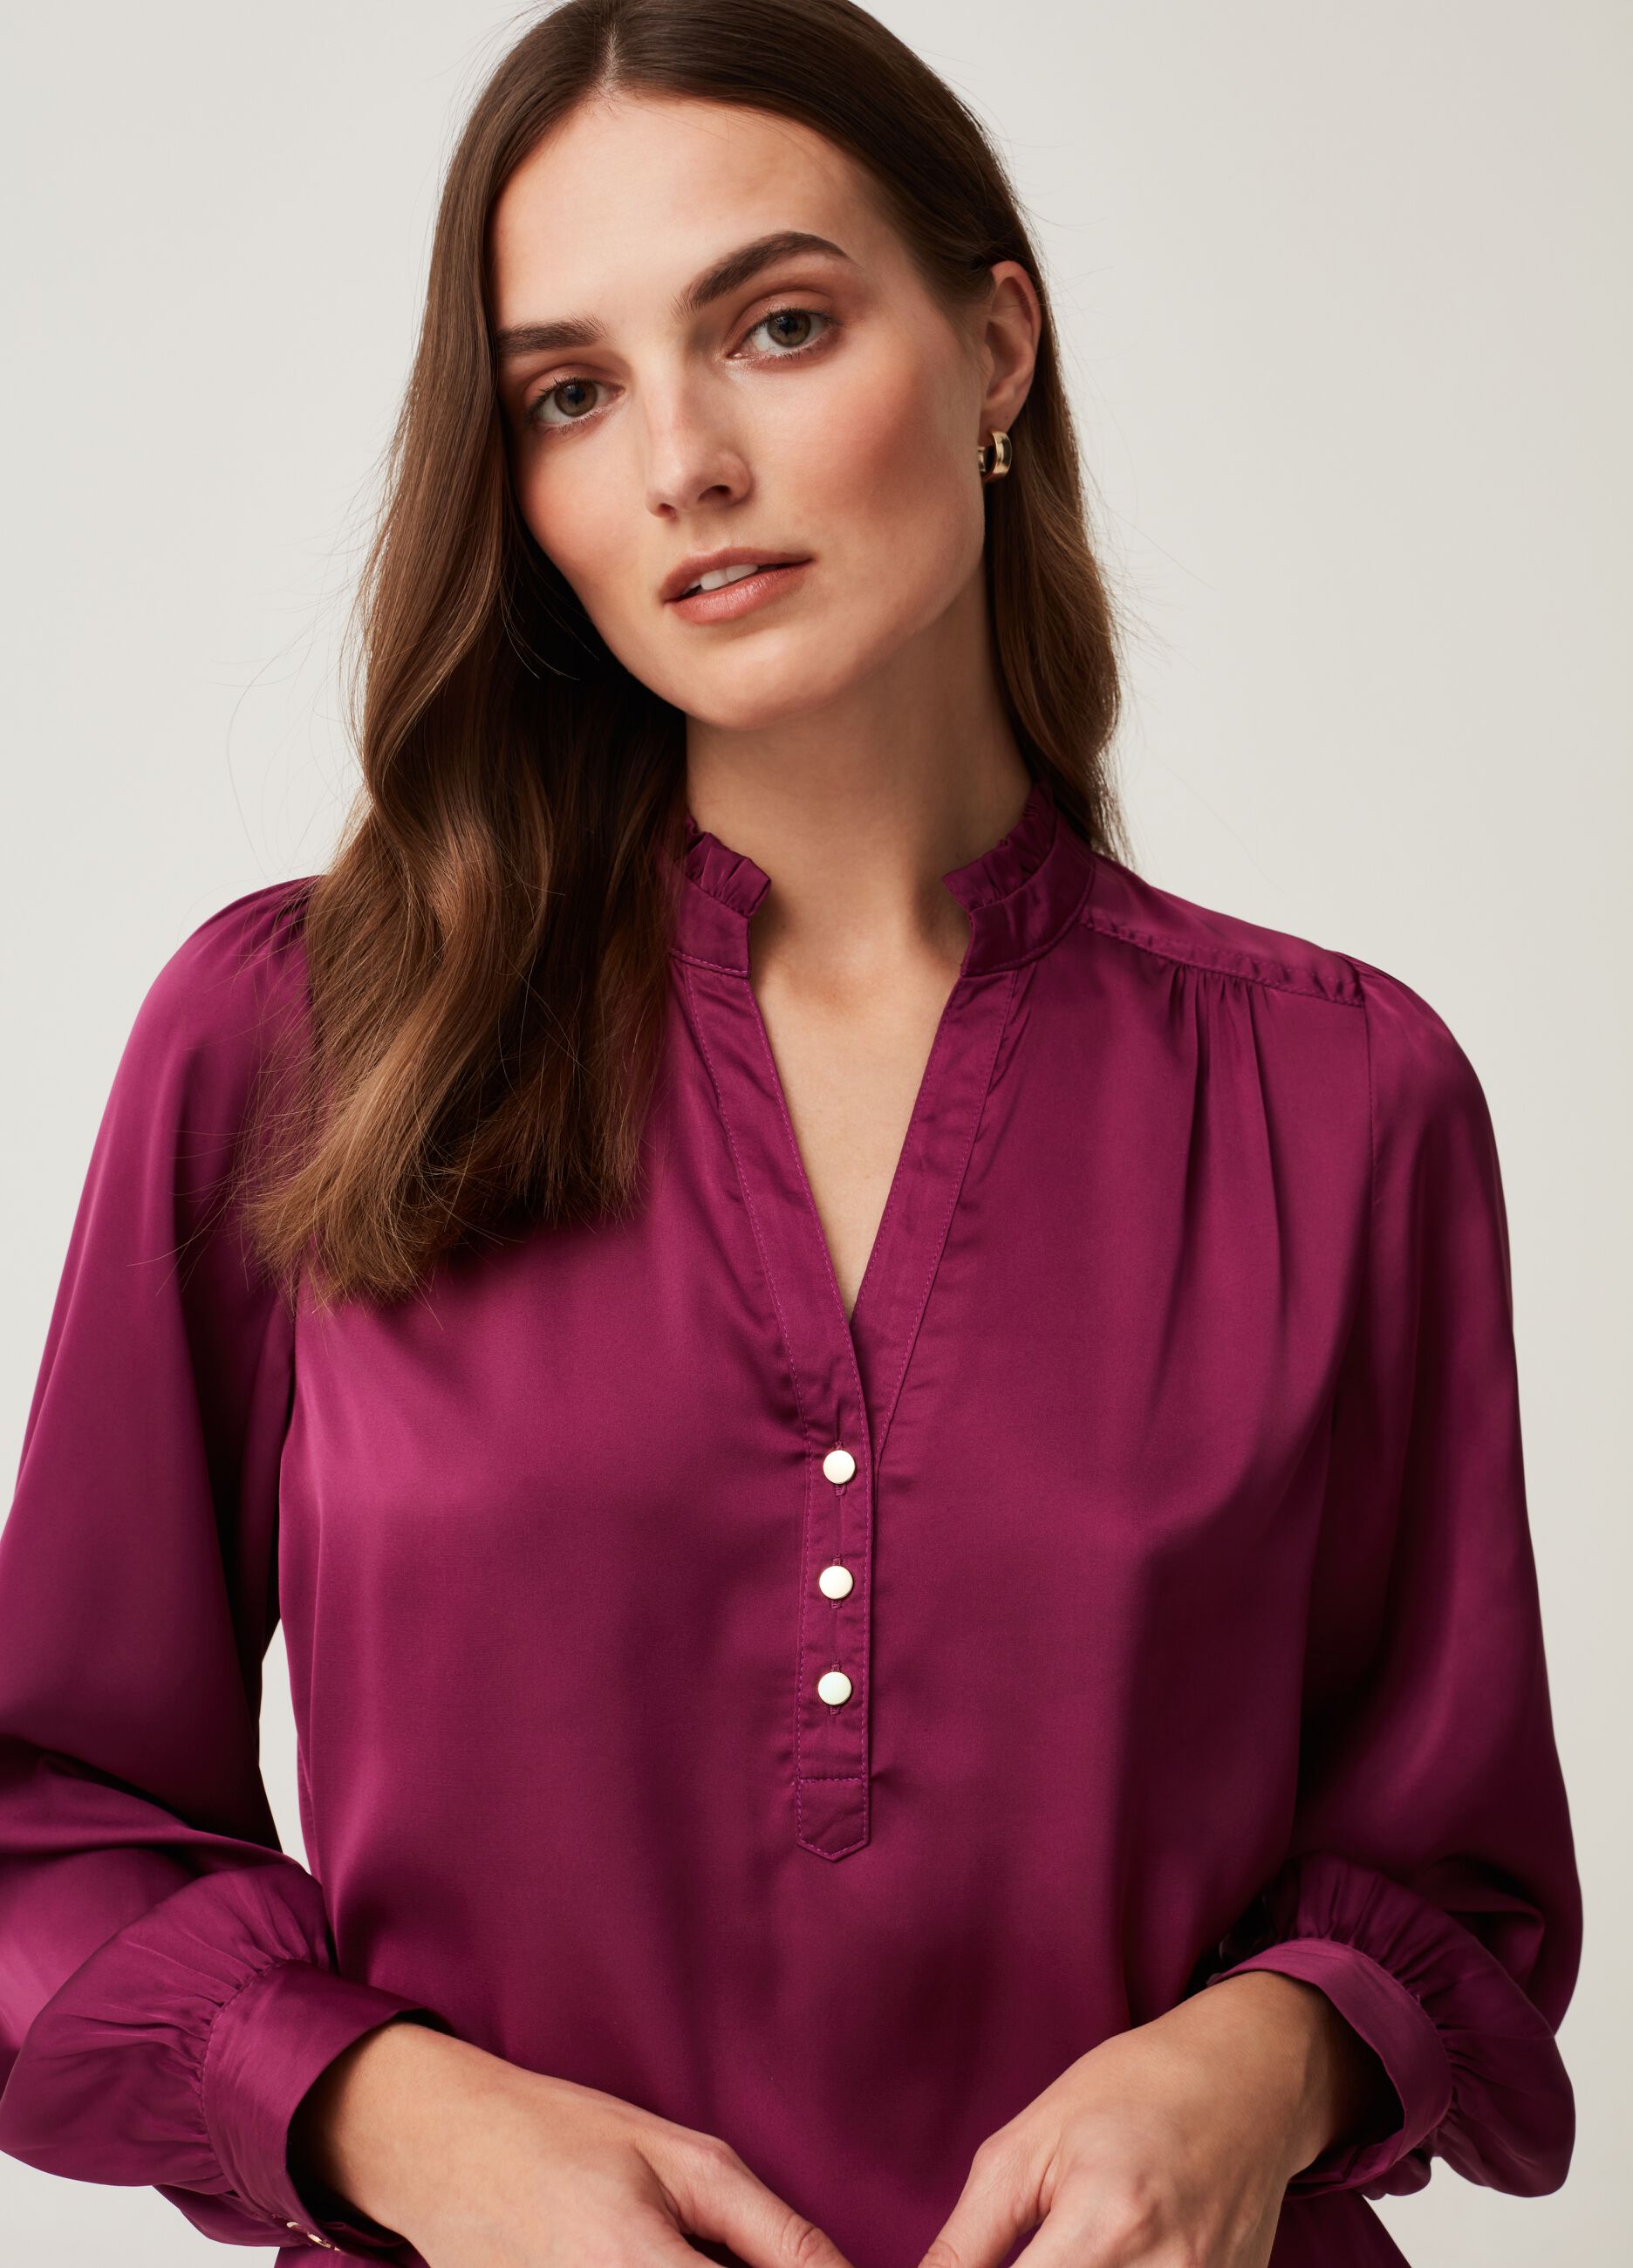 Satin blouse with gold buttons